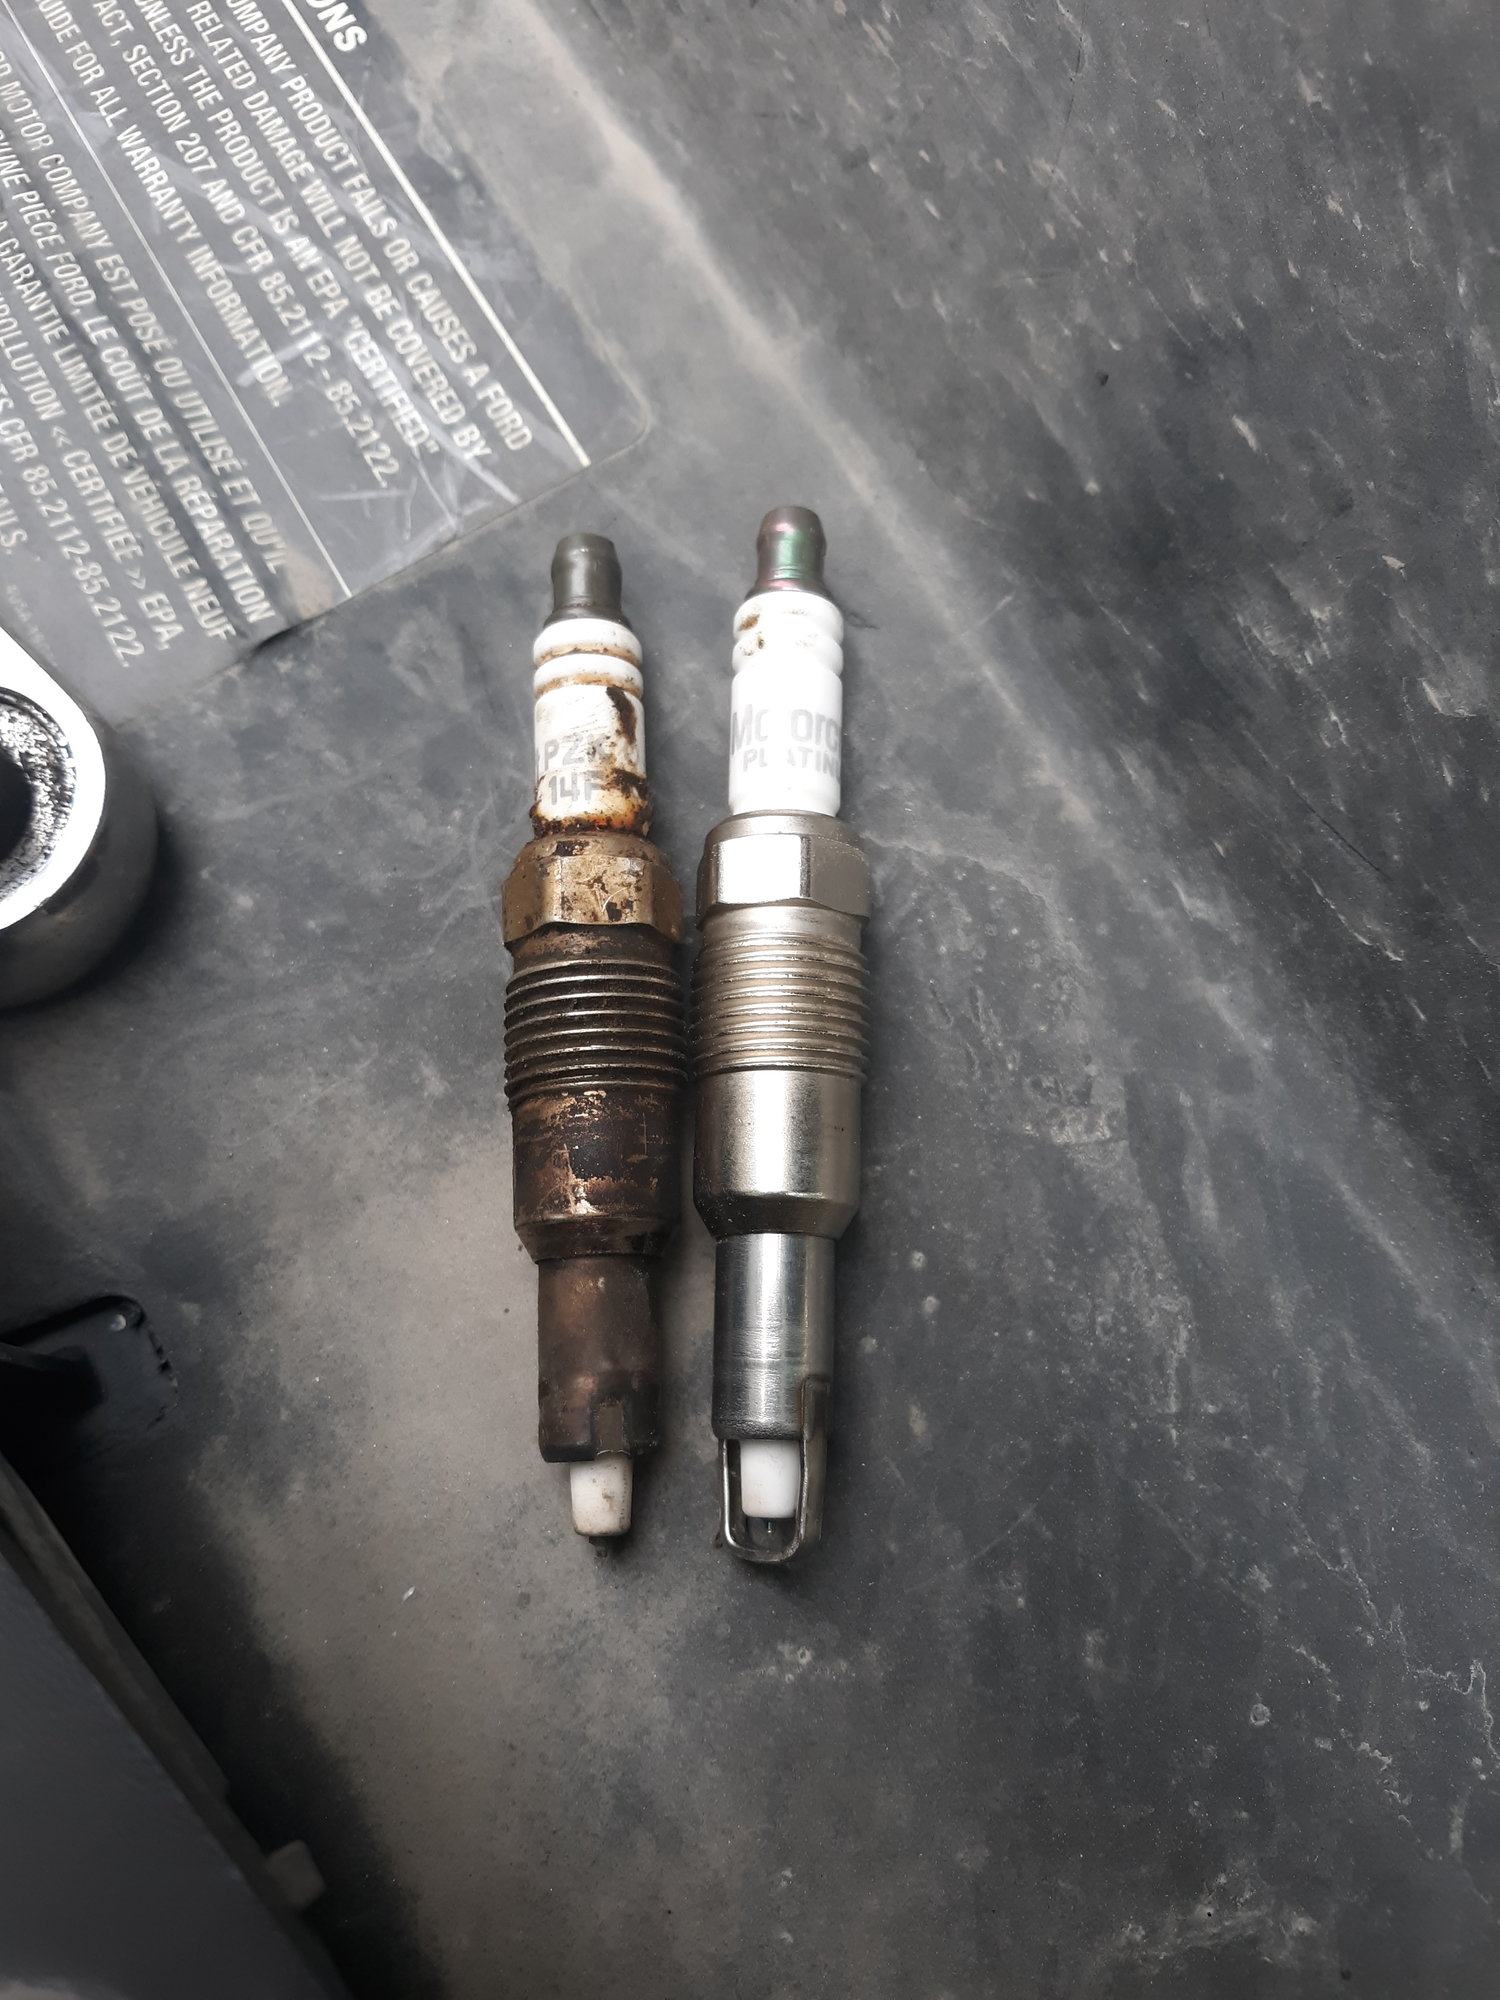 Spark plug tip broken?? - Ford Truck Enthusiasts Forums 1999 Ford F150 Spark Plug Blow Out